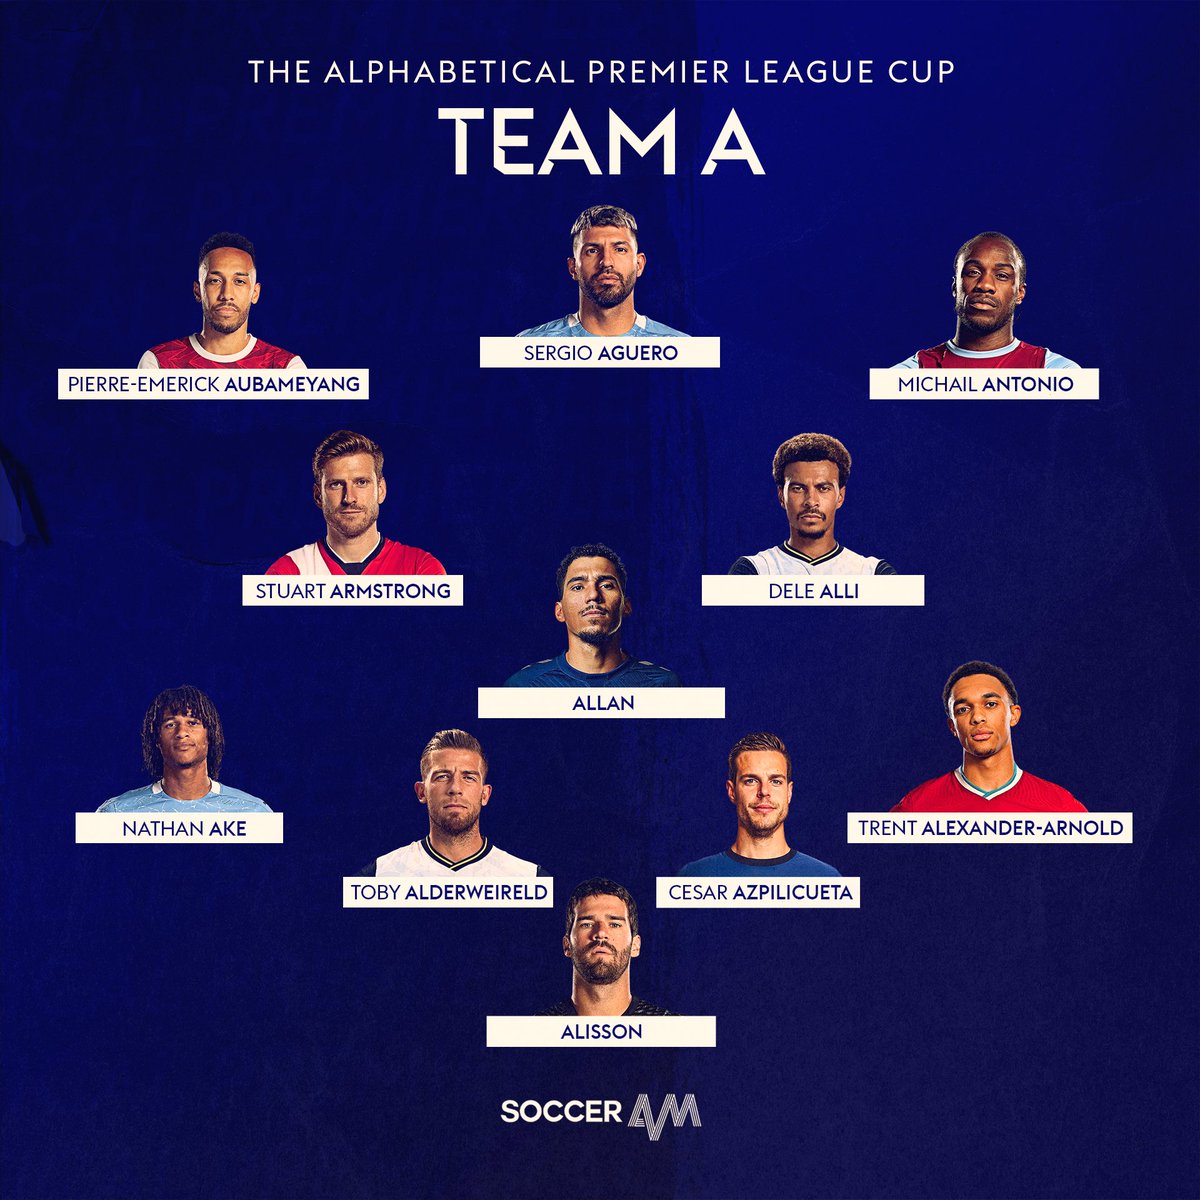 Team A Strong contenders for the cup. A balanced side with some big names and hard workers. Expect them to battle right to the end of the tournament. Star man: Sergio Aguero Captain: Cesar Azpilicueta